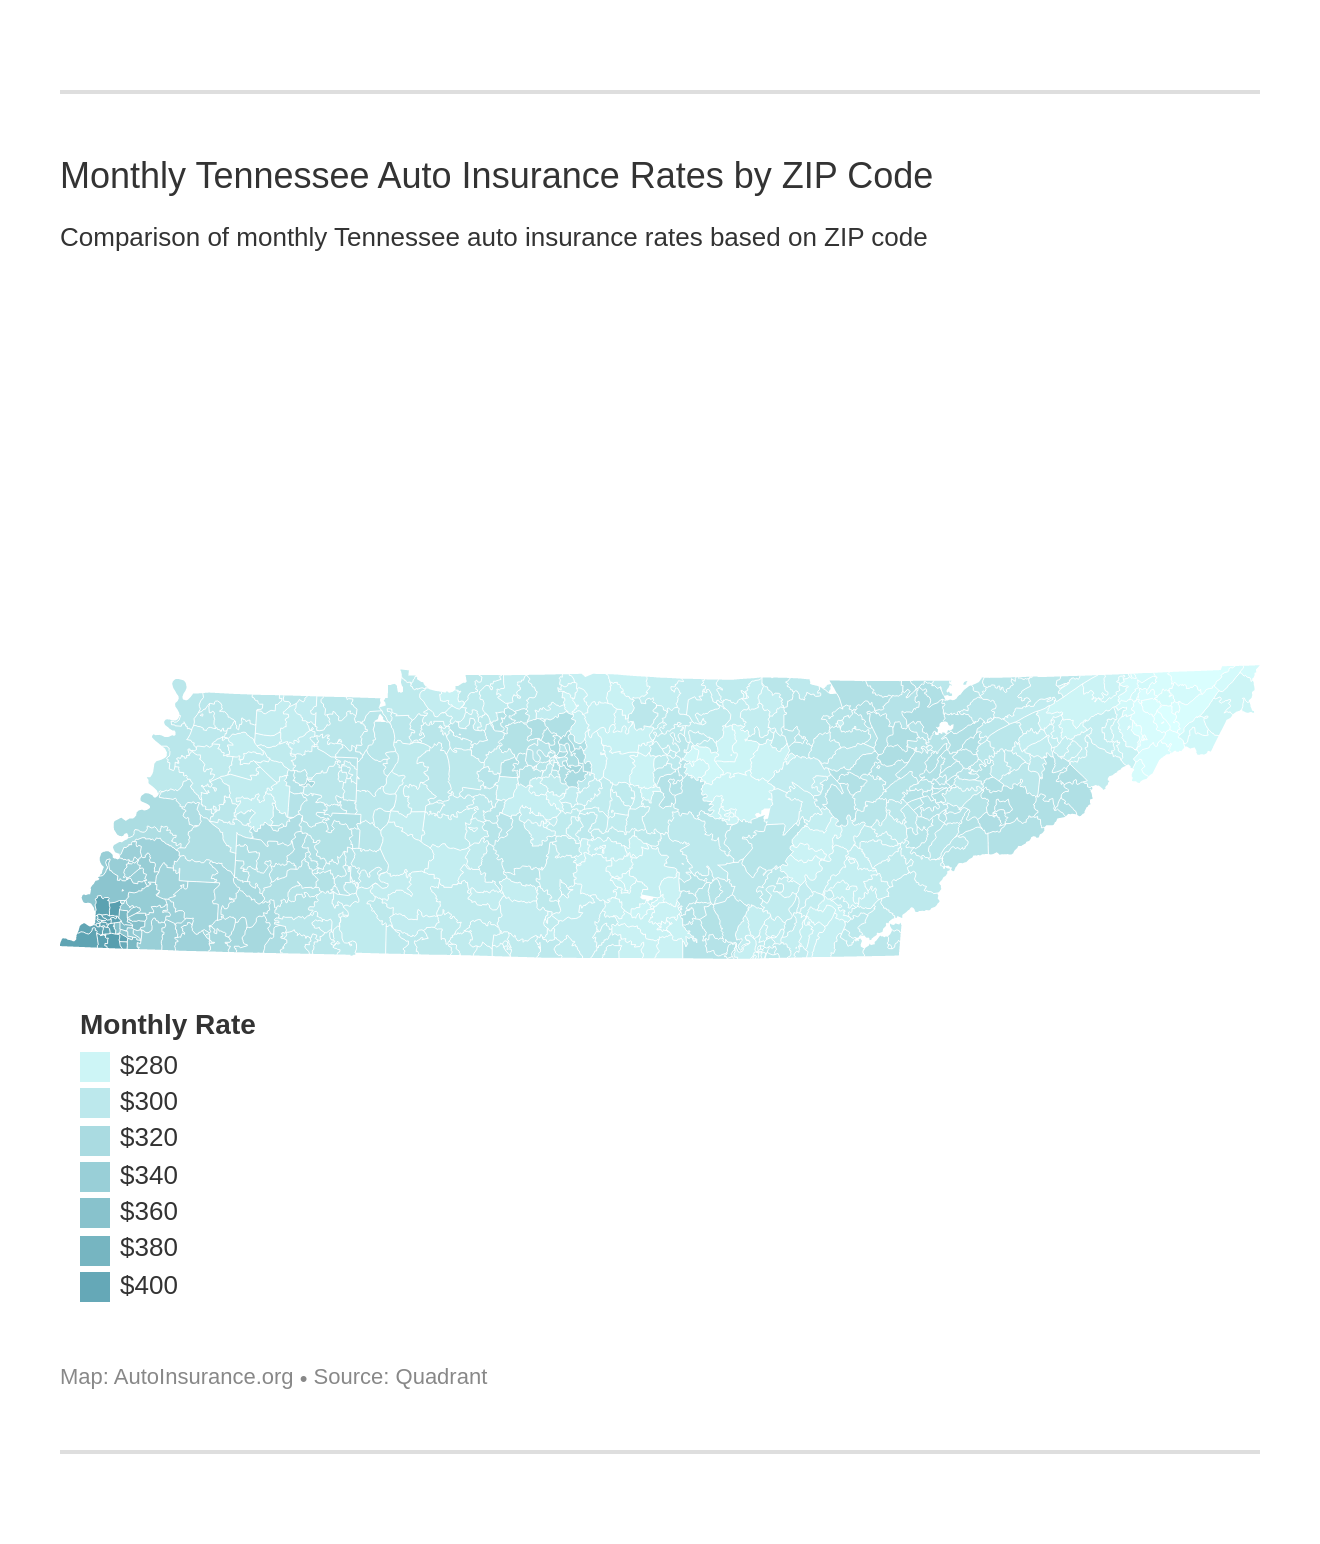 Monthly Tennessee Auto Insurance Rates by ZIP Code